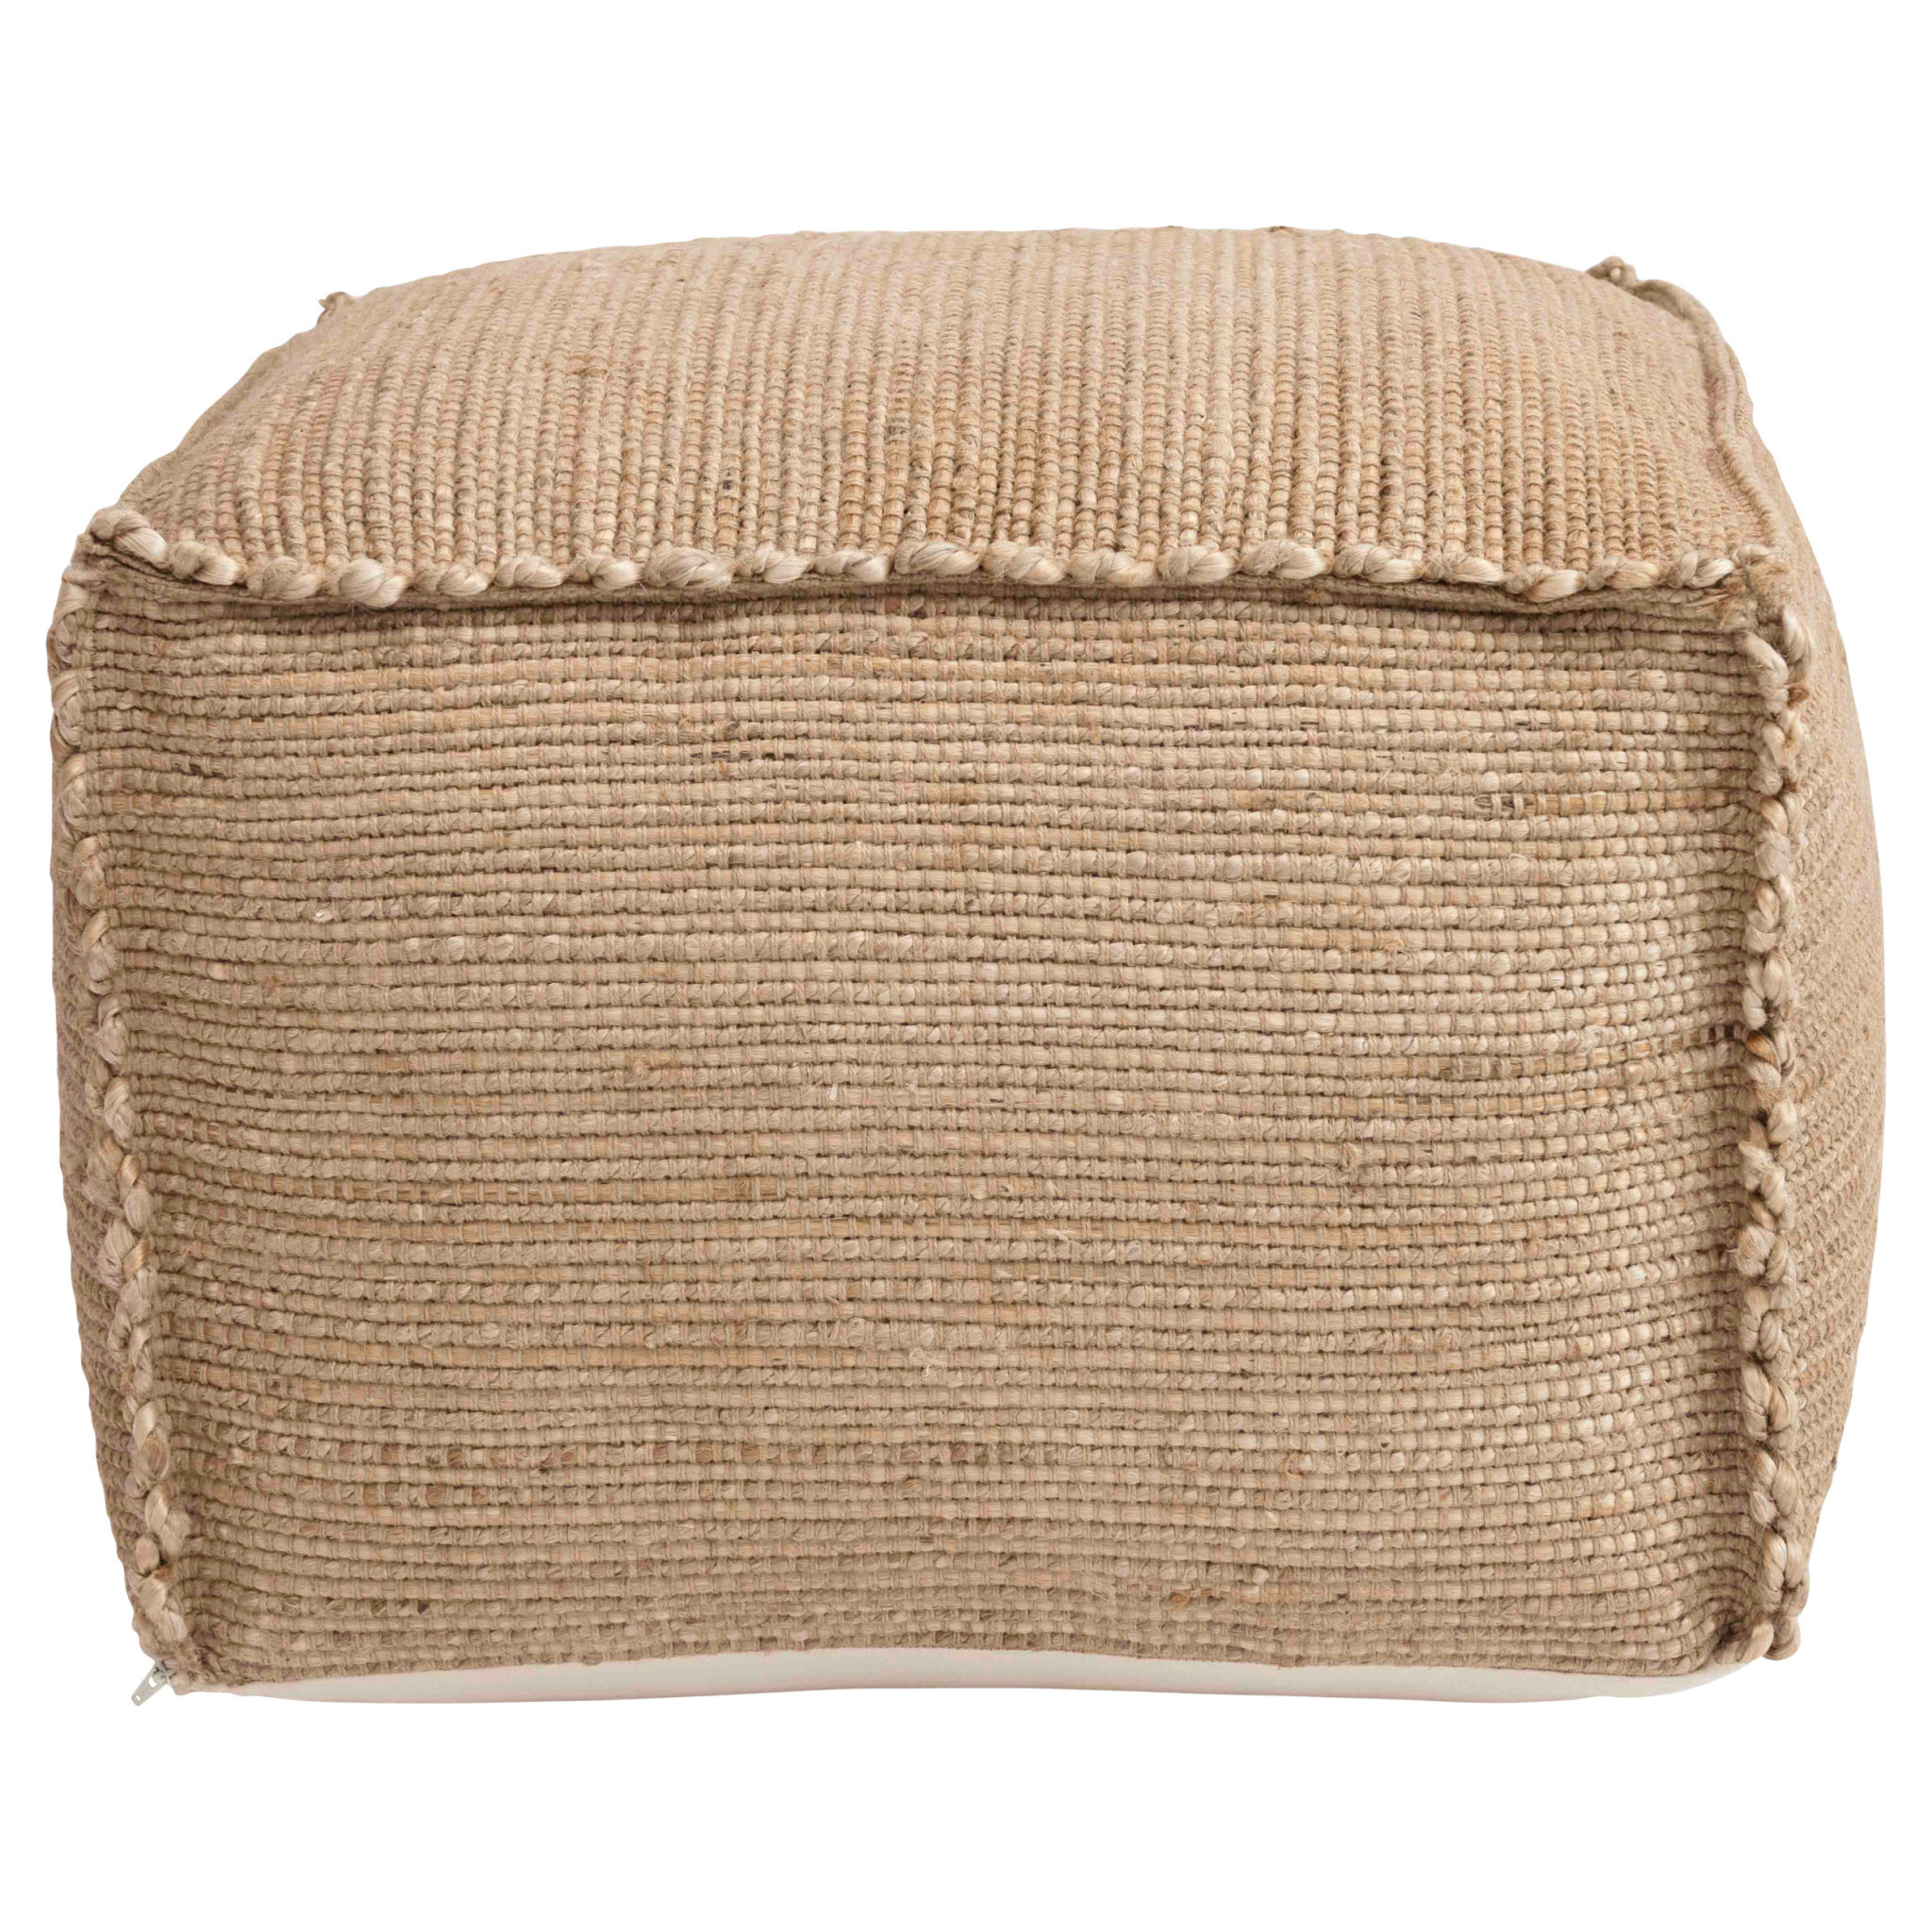 Hand-Woven Jute Pouf, Natural, 24 x 16 x 24 Furniture Available for Local Delivery and Pick Up